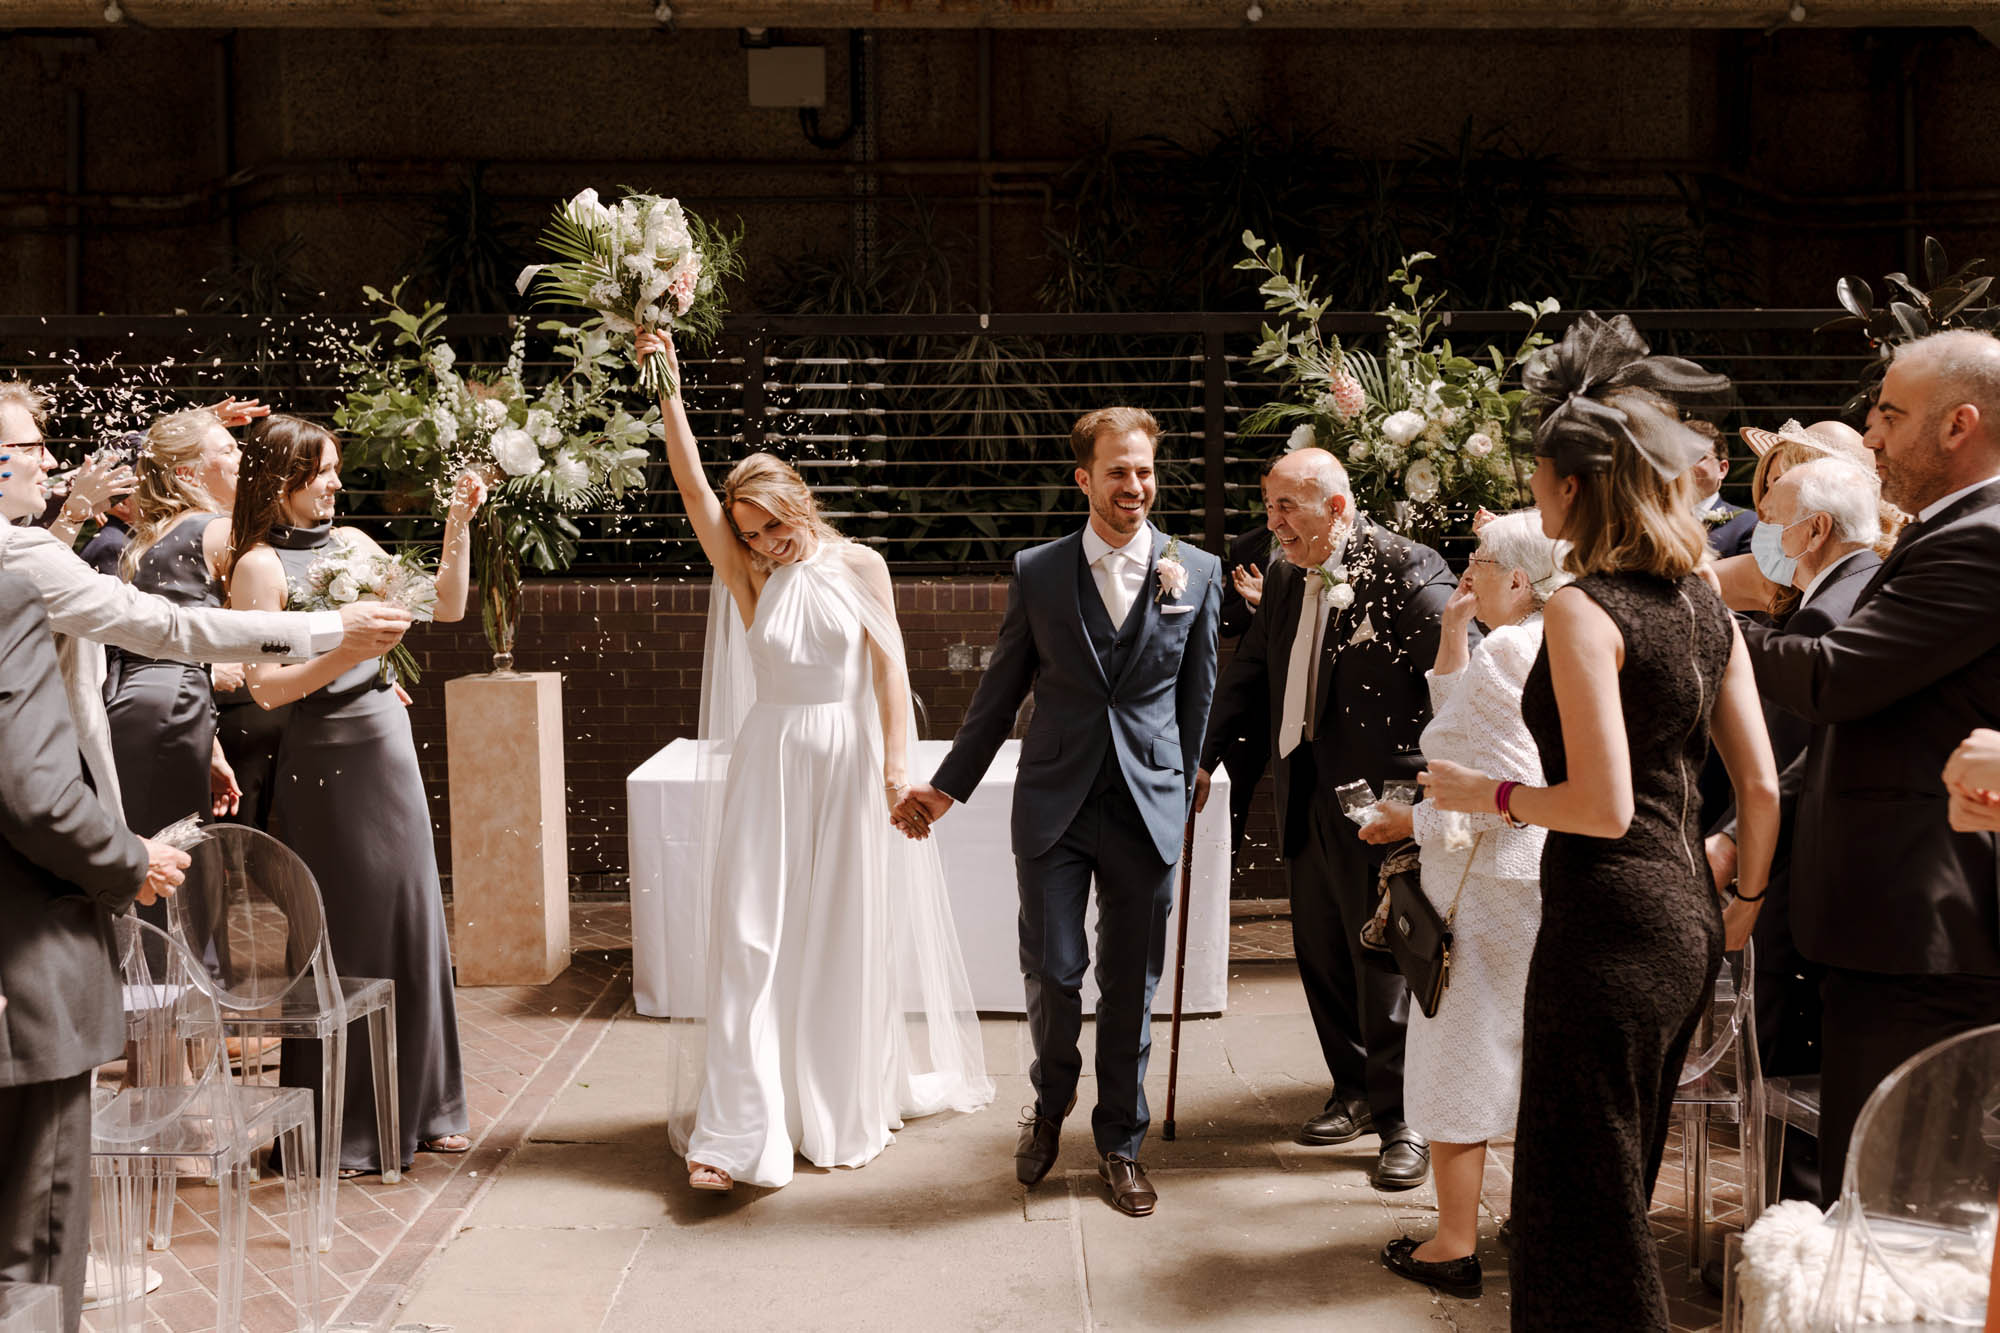 Wedding at The Barbican Centre. Photographer credit Joe from the Curries